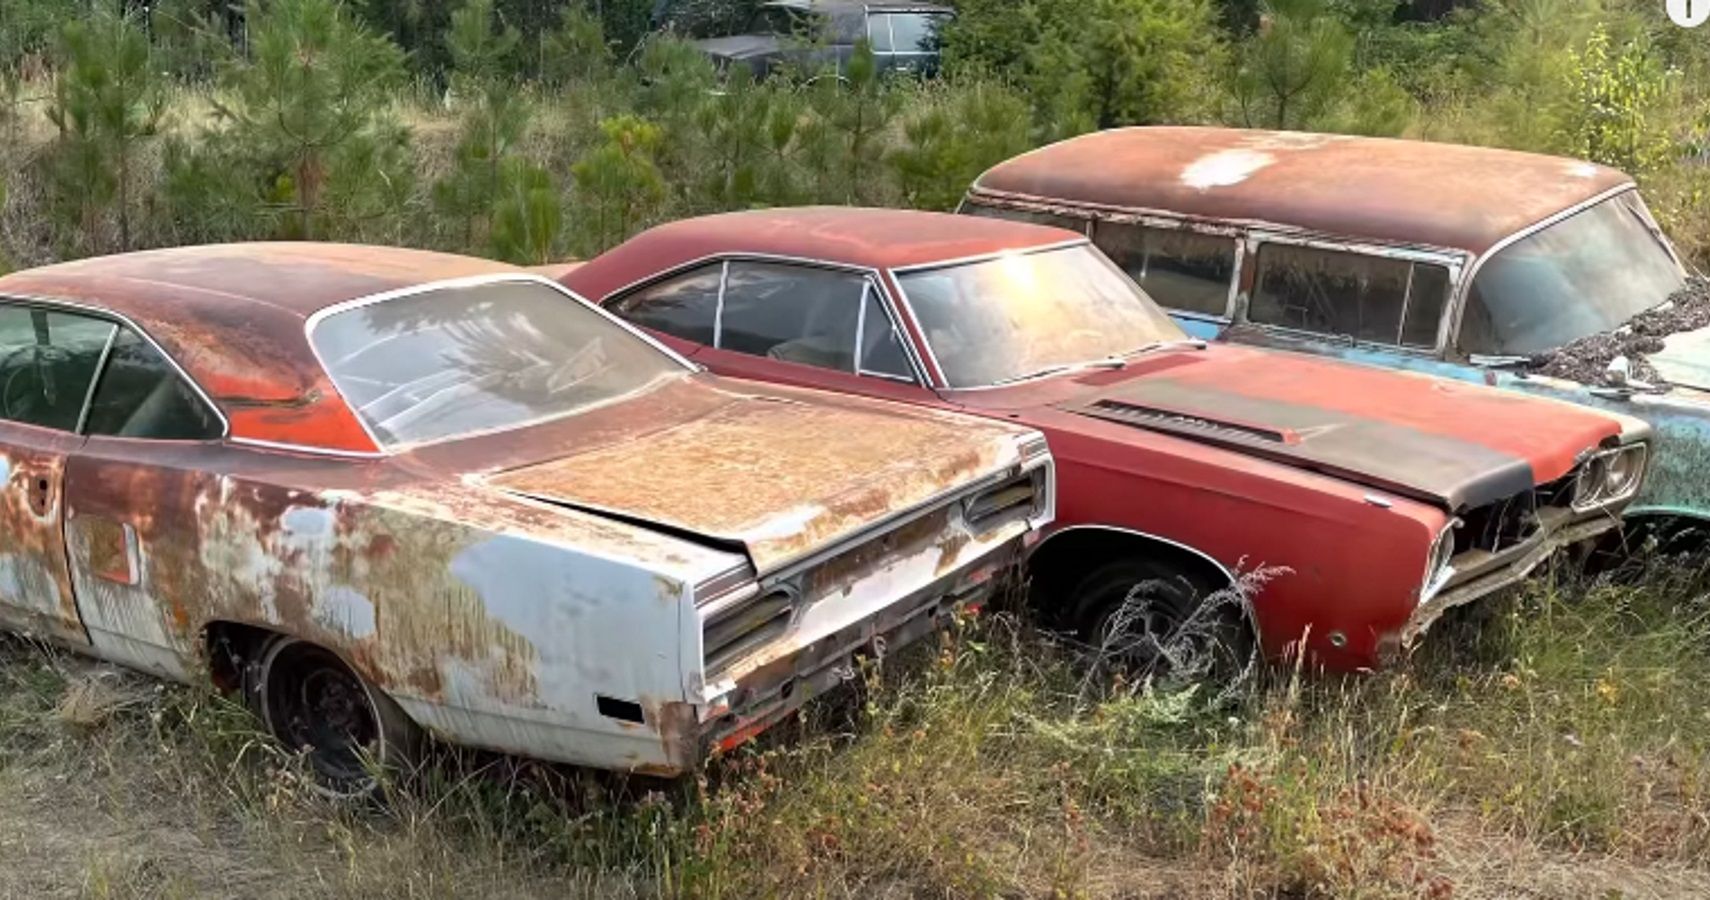 YouTuber Reveals “Muscle Car Field Of Sadness” With A Plymouth Road Runner, Chevy Impala, And More